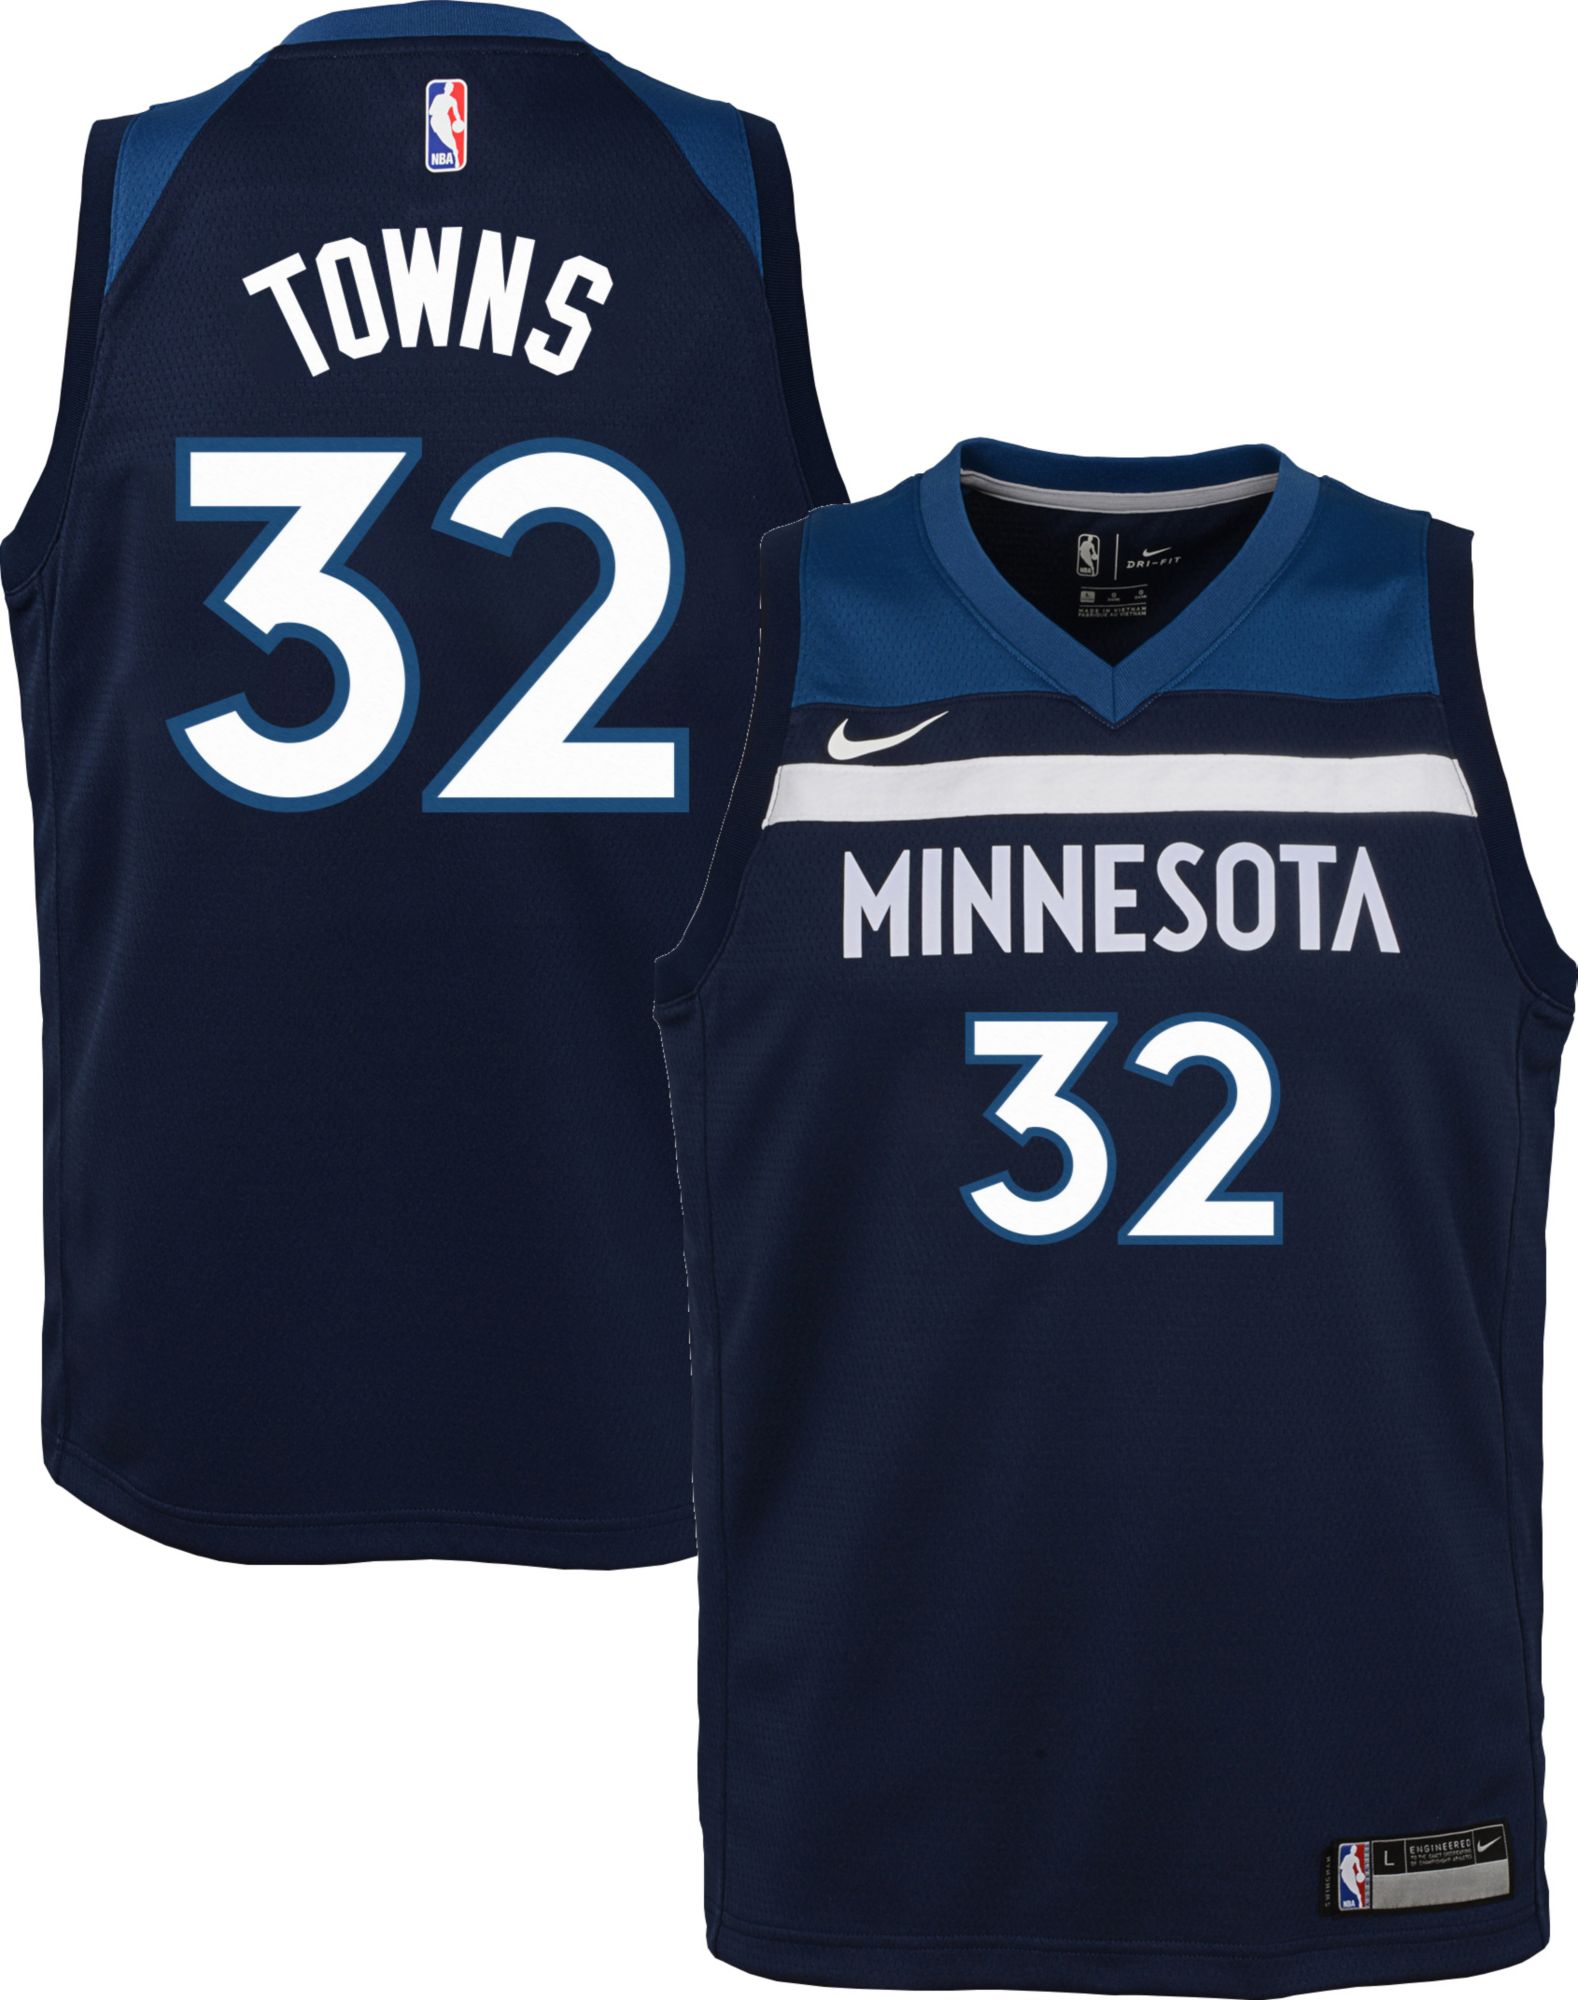 karl anthony towns throwback jersey